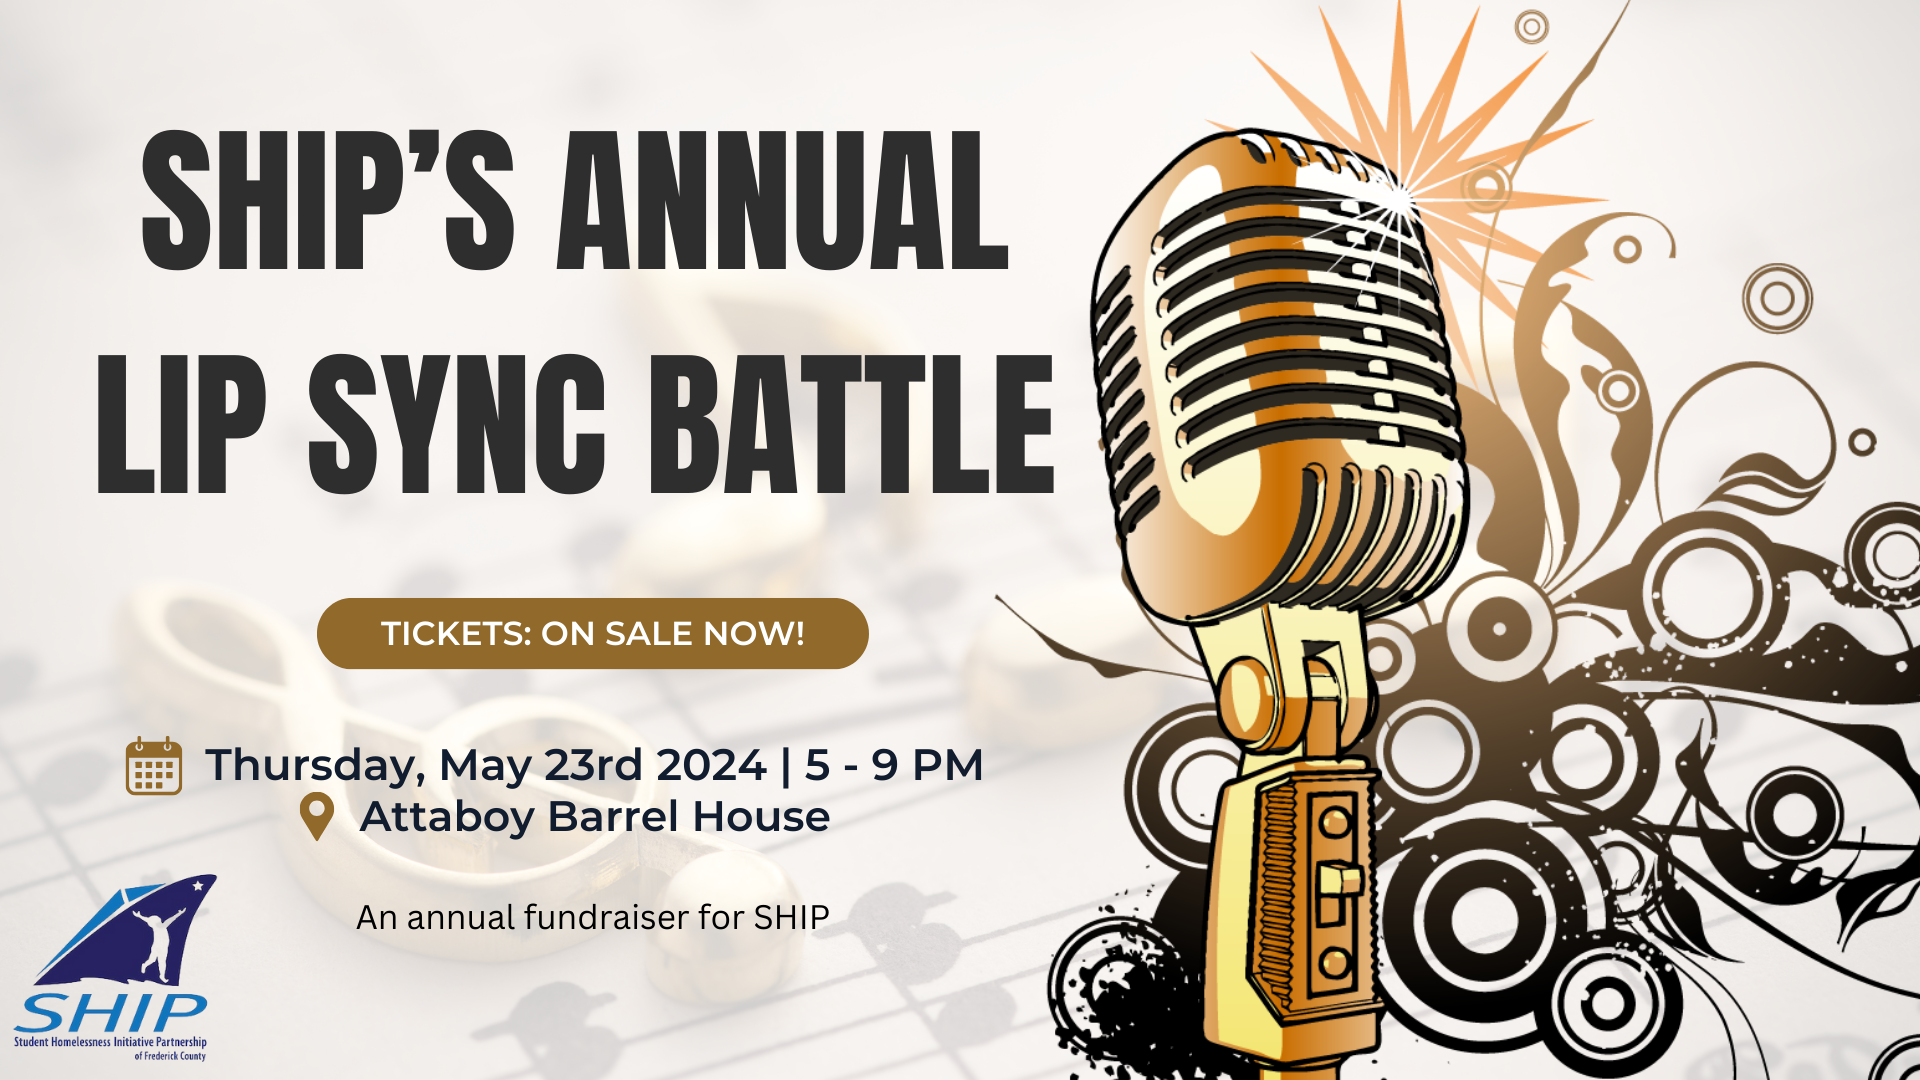 2024 lip sync battle, live performances, thursday may 23rd from 5-9pm at attaboy barrel house